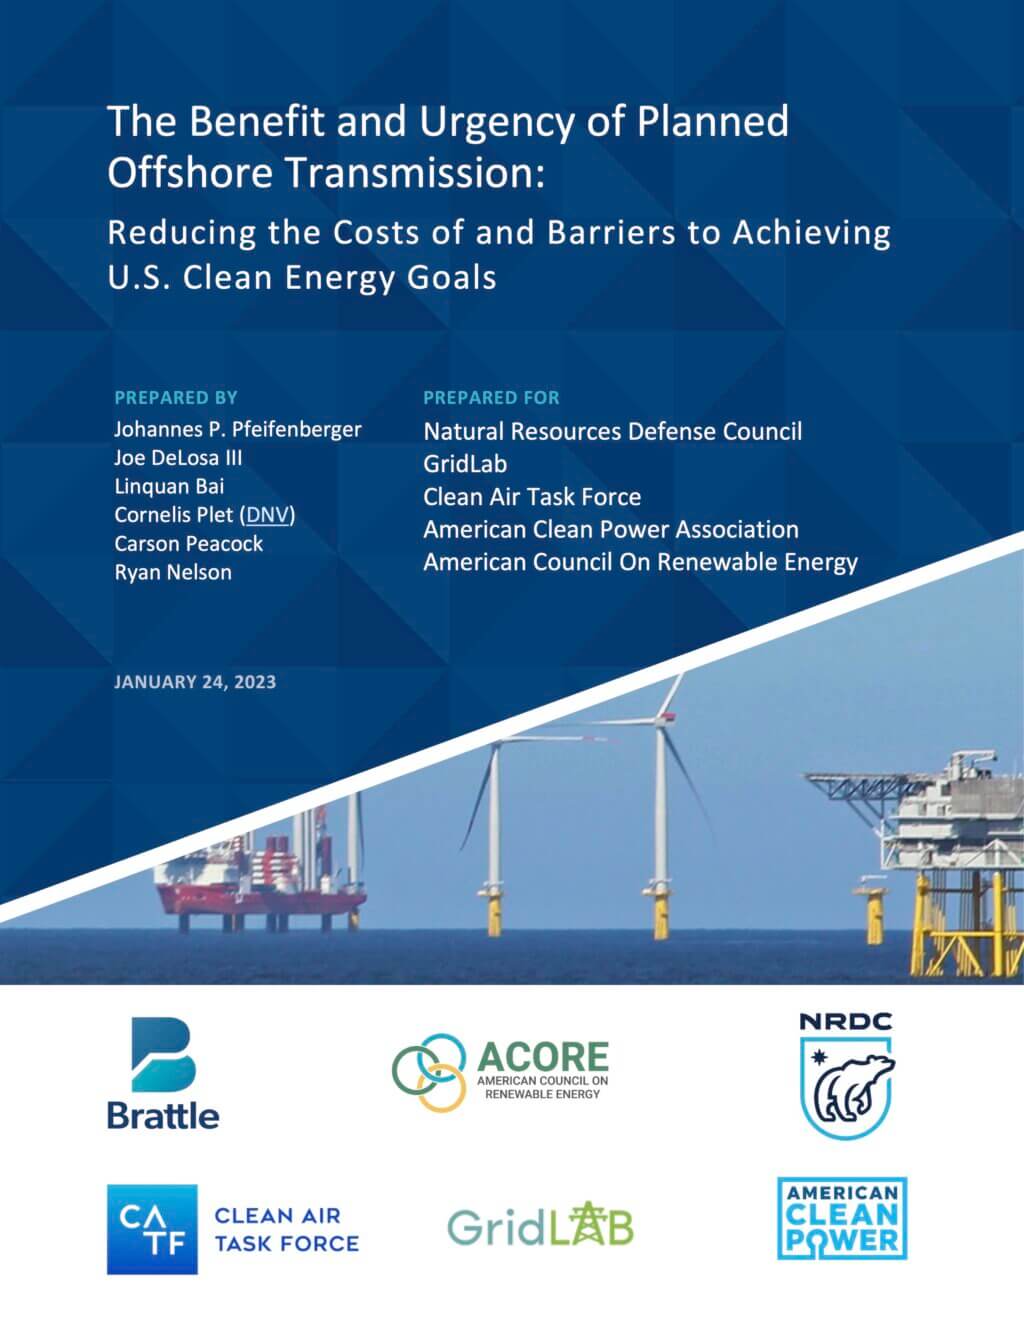 Cover Photo for ACP's The Benefit and Urgency of Planned Offshore transmission Presentation.